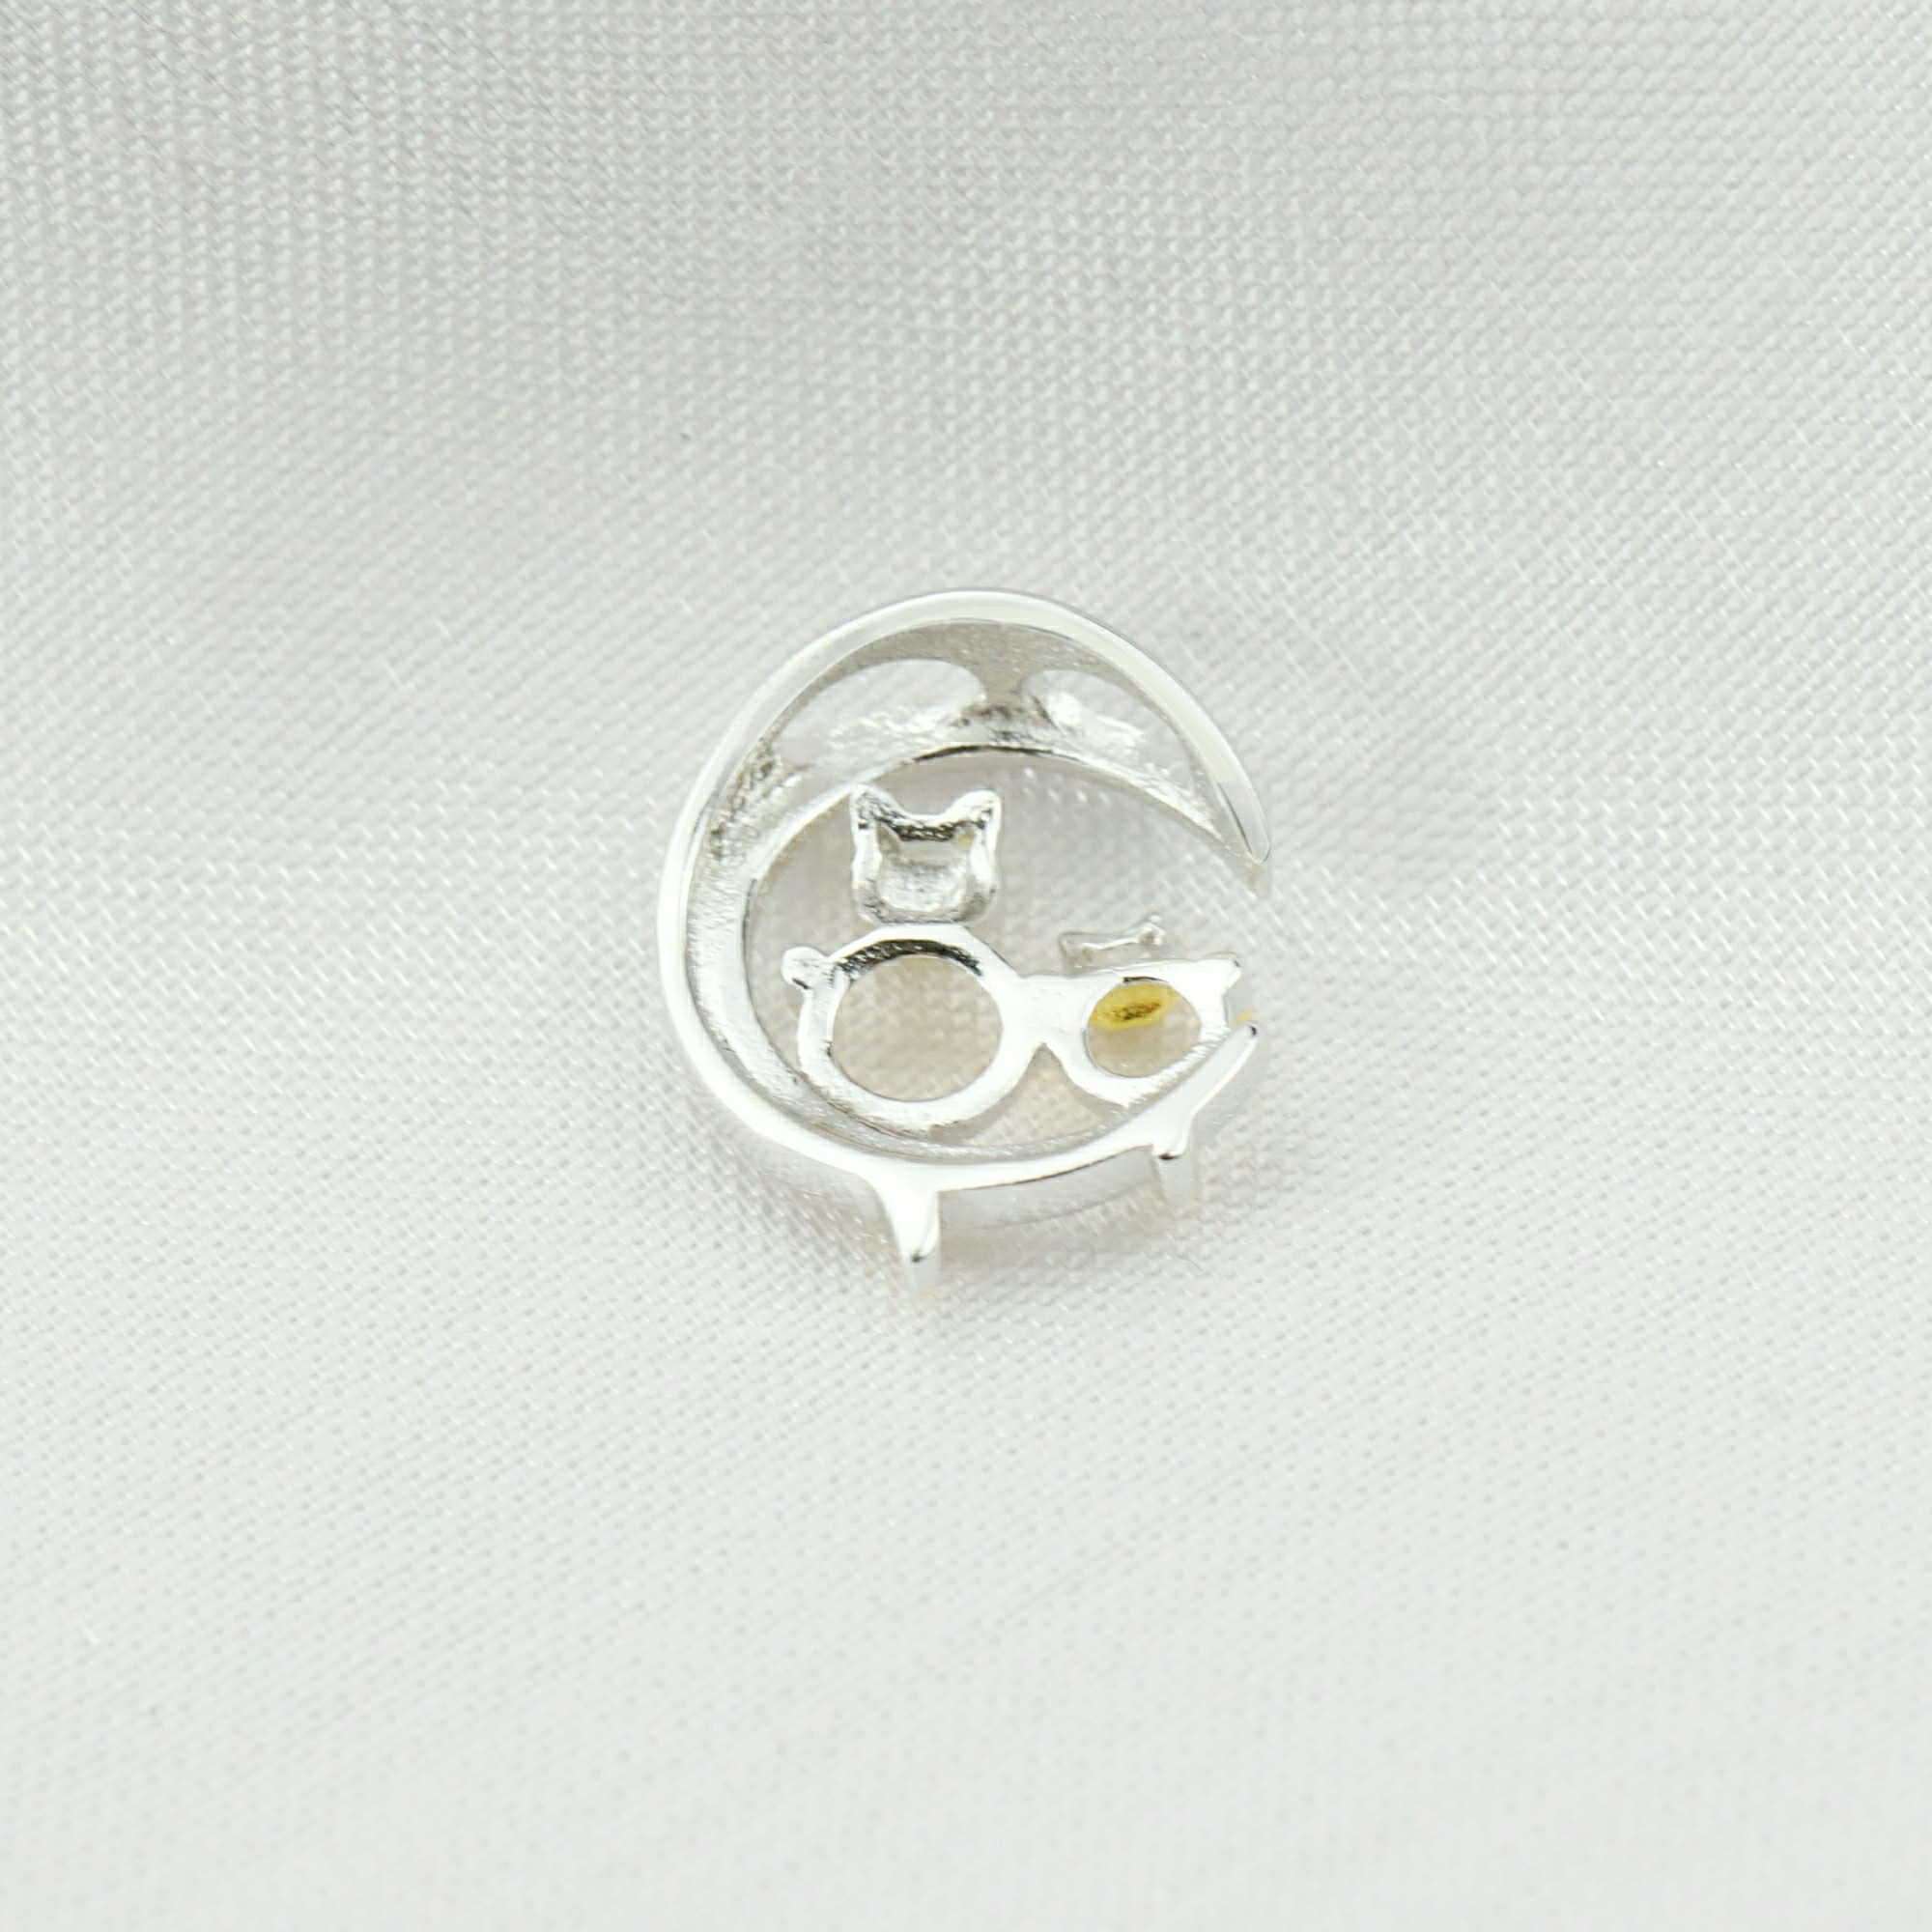 Round Prong Bezel Pendant Settings Gold Plated Solid 925 Sterling Silver Kitty Cat Charm DIY Supplies for 3MM 4MM Gemstone 1431101 - Click Image to Close